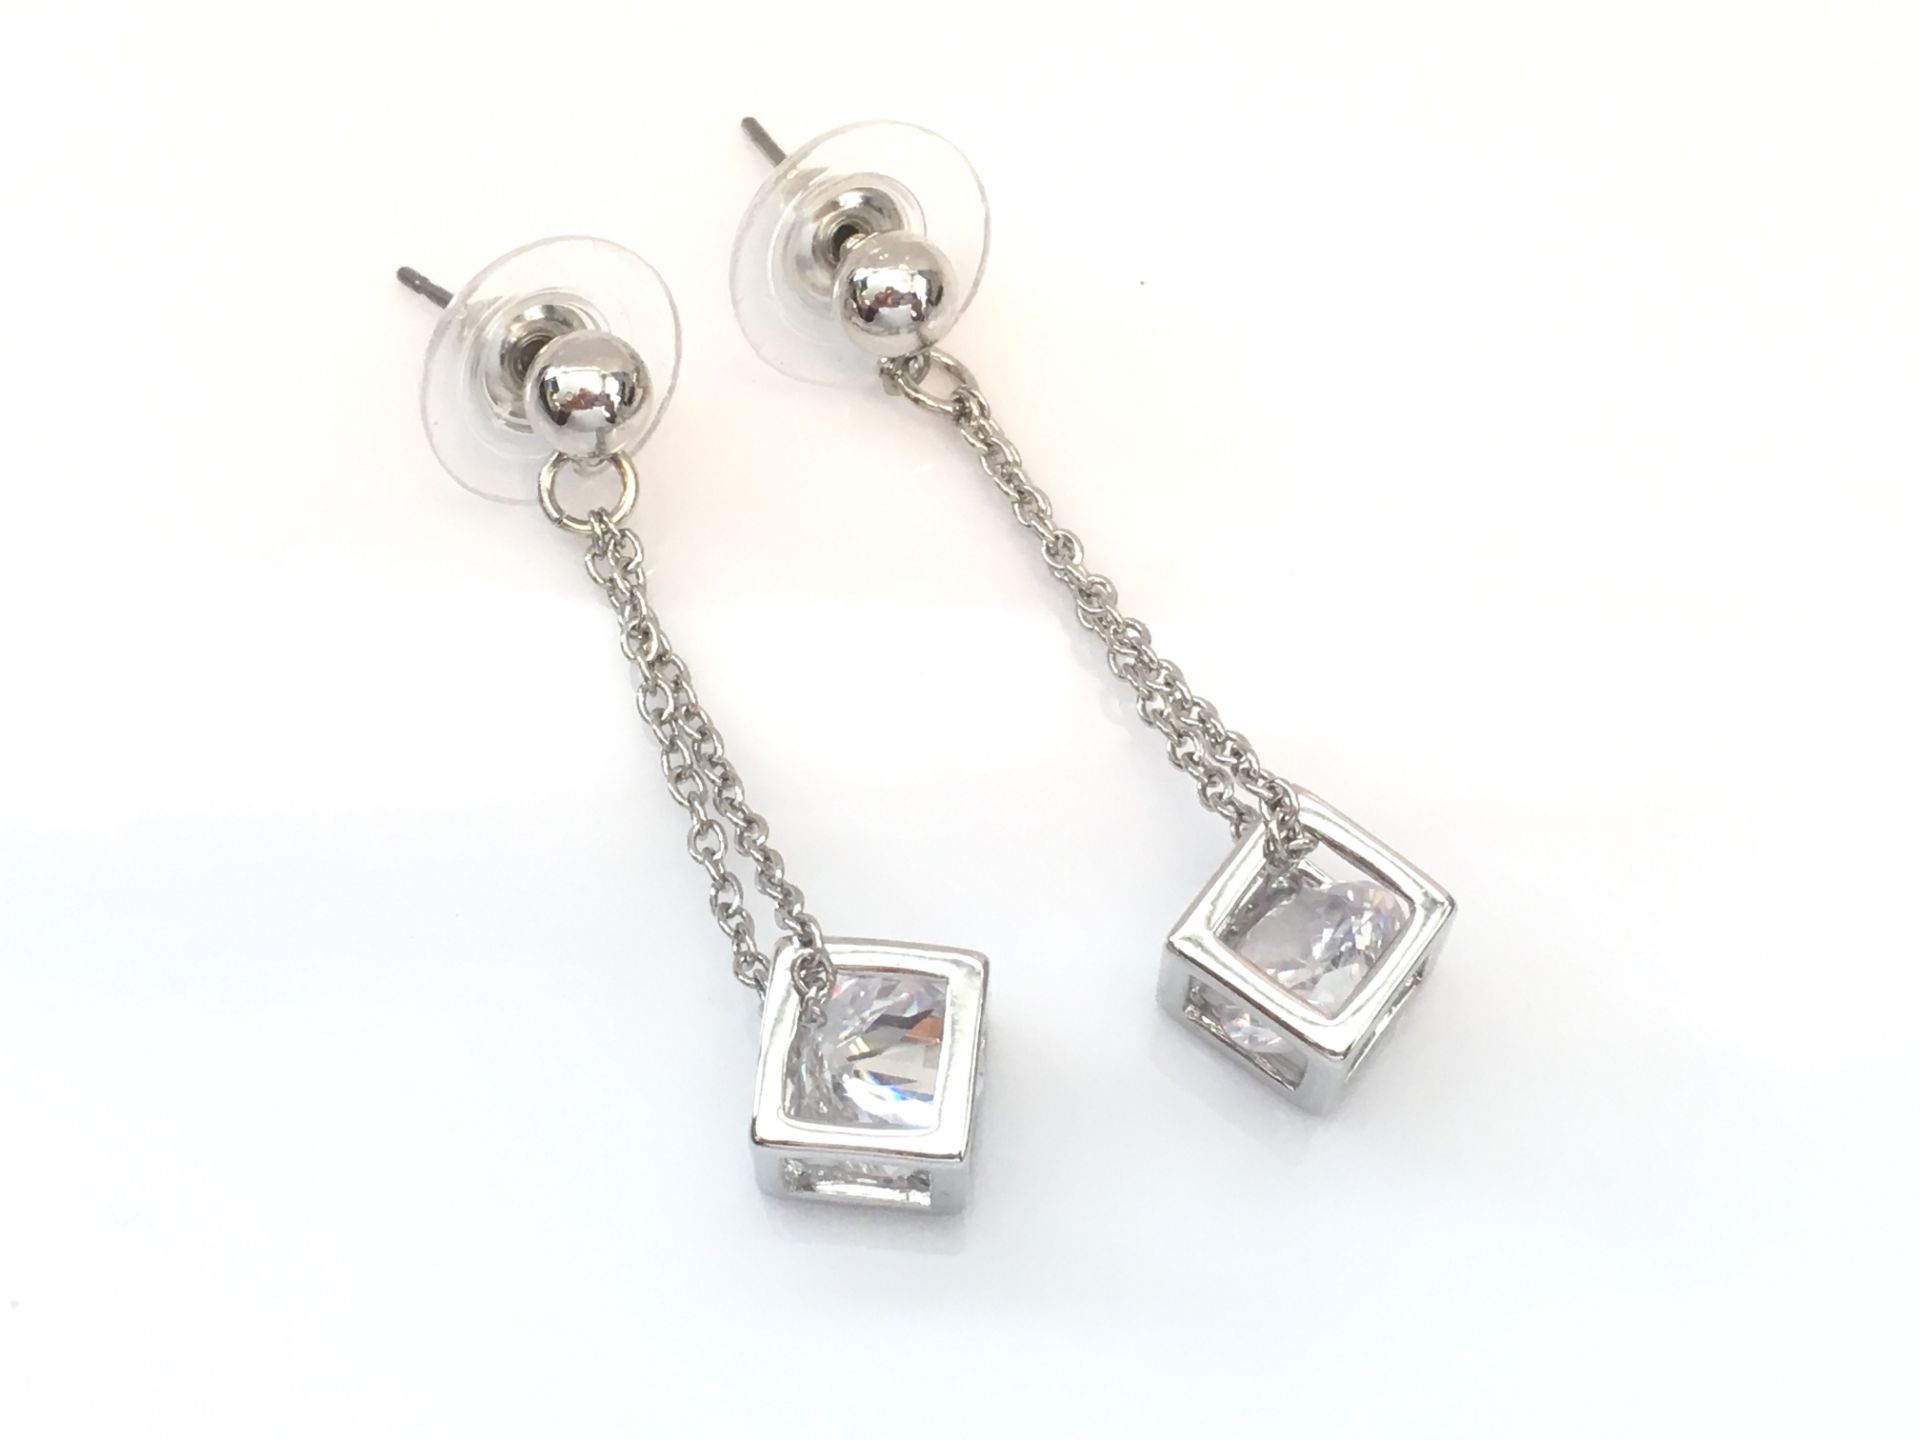 Silver Necklace and Earring set with Swarovski Crystal - Image 4 of 4